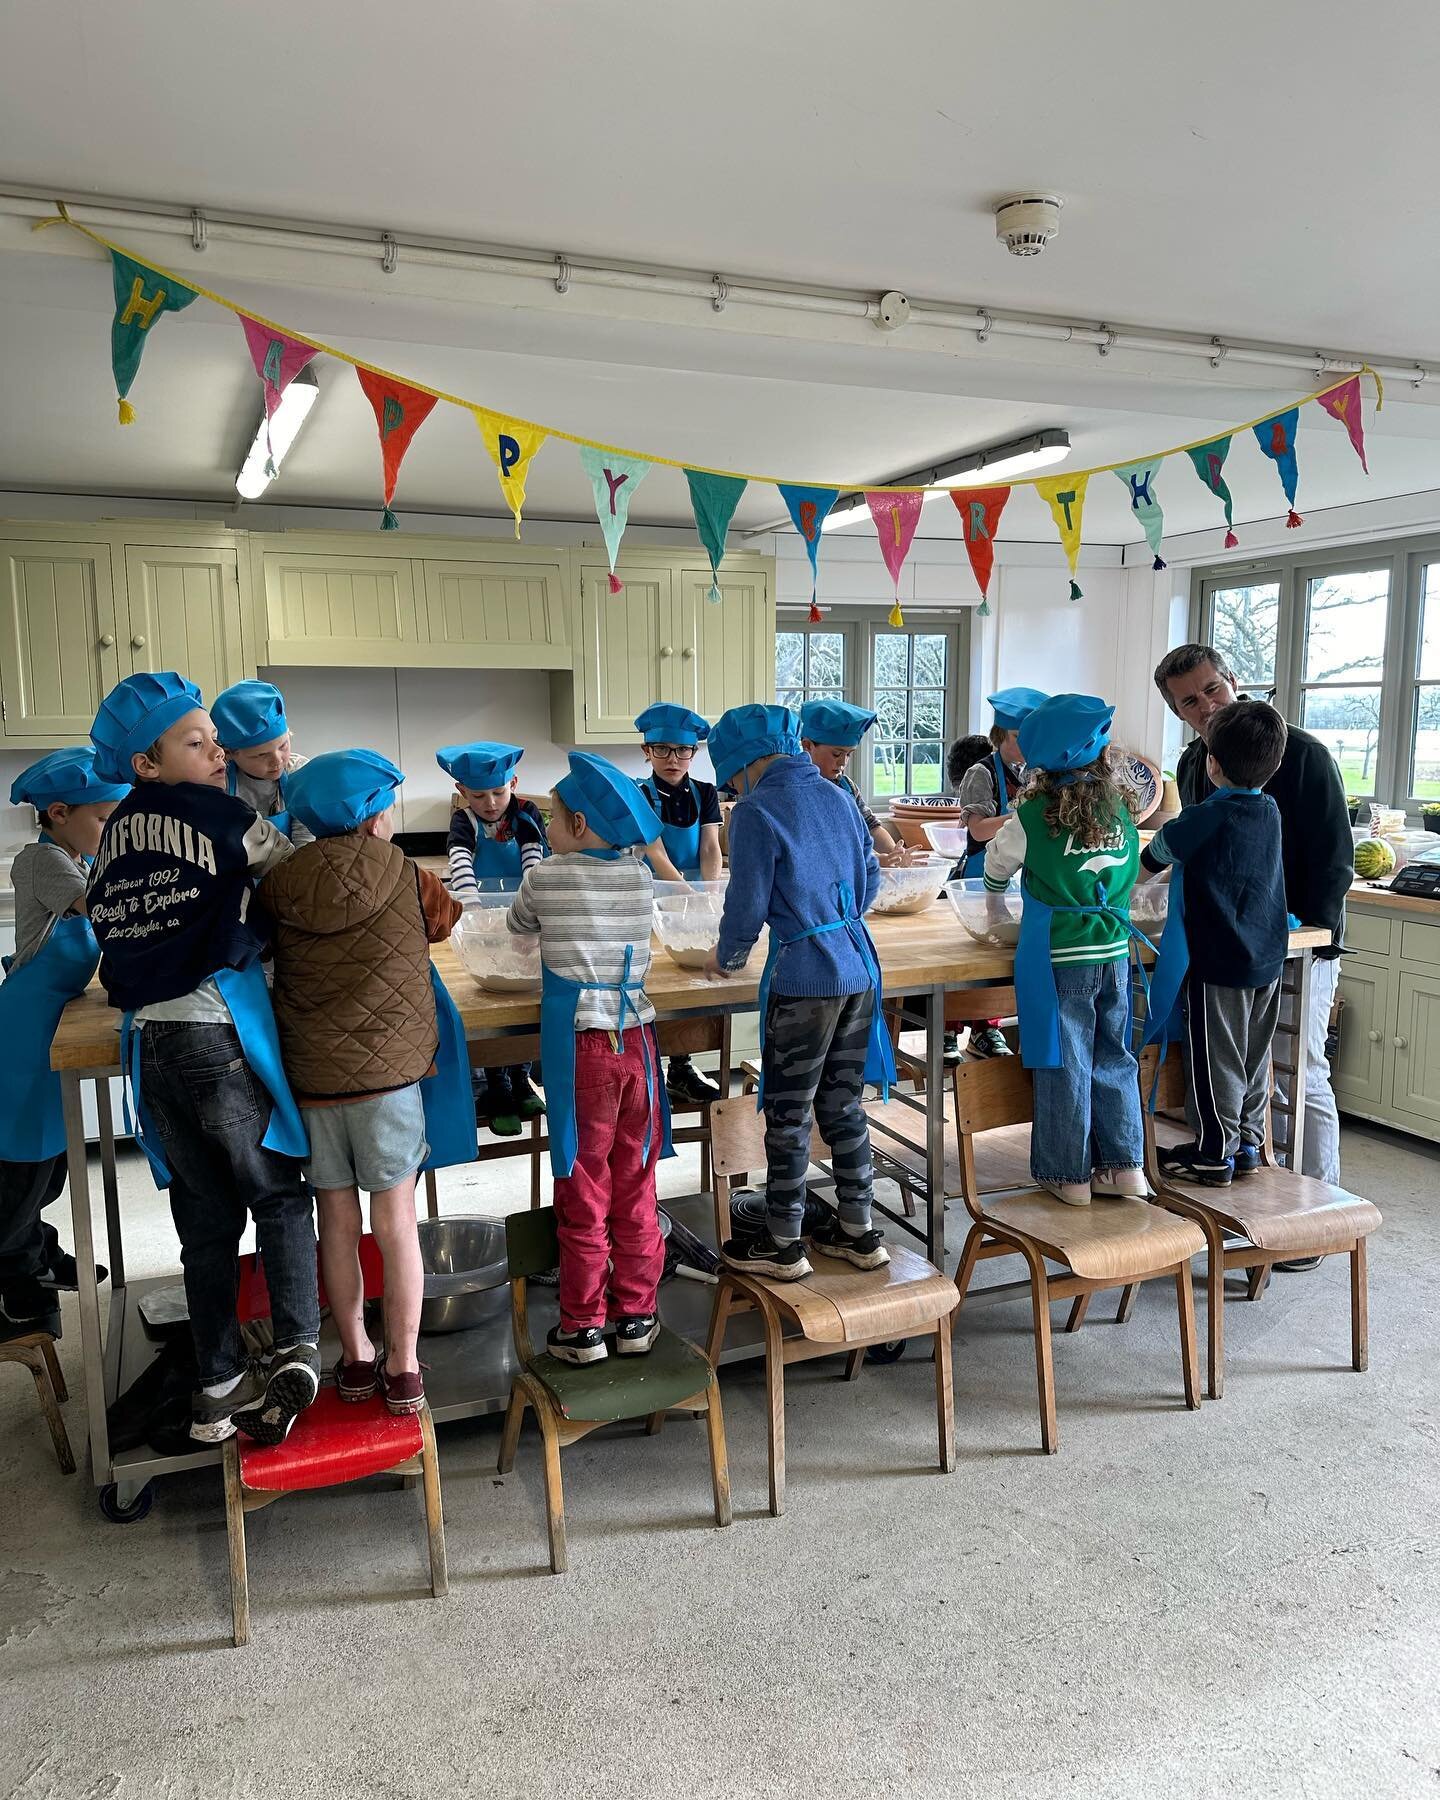 The sweetest little bakers in town 🥰 A few snaps from this weekend&rsquo;s private bread &amp; pizza making birthday party 🎂 Everyone went home with their own dough to show off their new skills! 

Email 📧 school@sourdoughrevolution.co.uk for speci